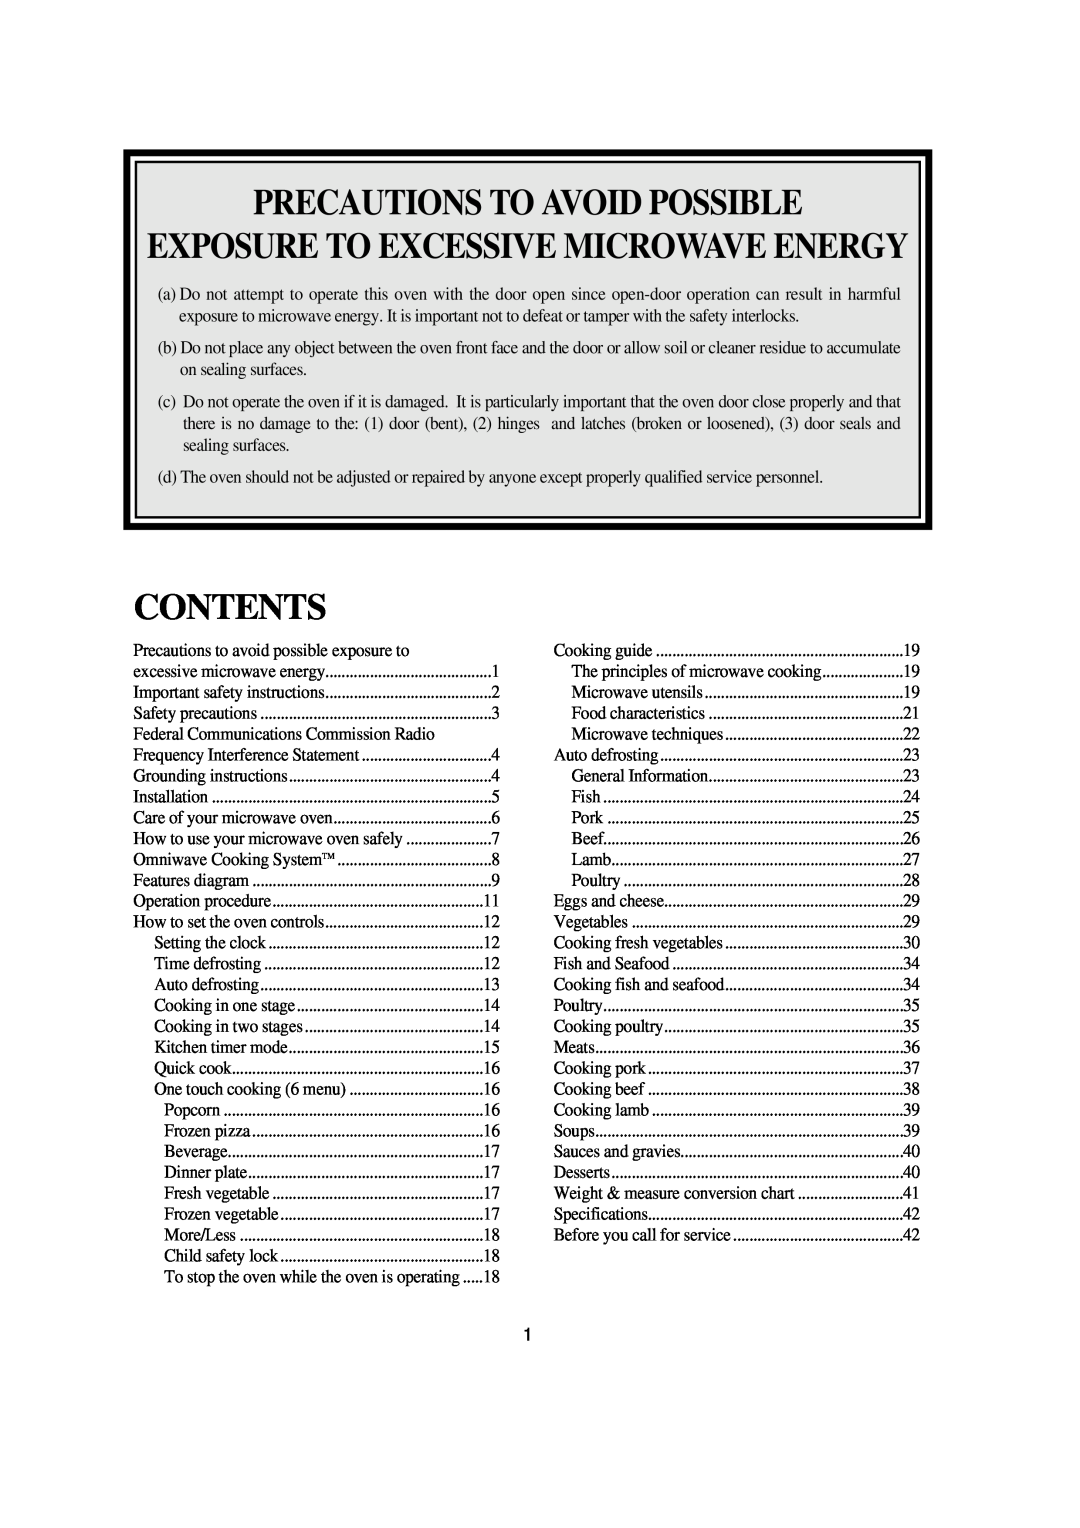 Emerson MW8993WC/BC owner manual Precautions To Avoid Possible, Contents, Exposure To Excessive Microwave Energy 